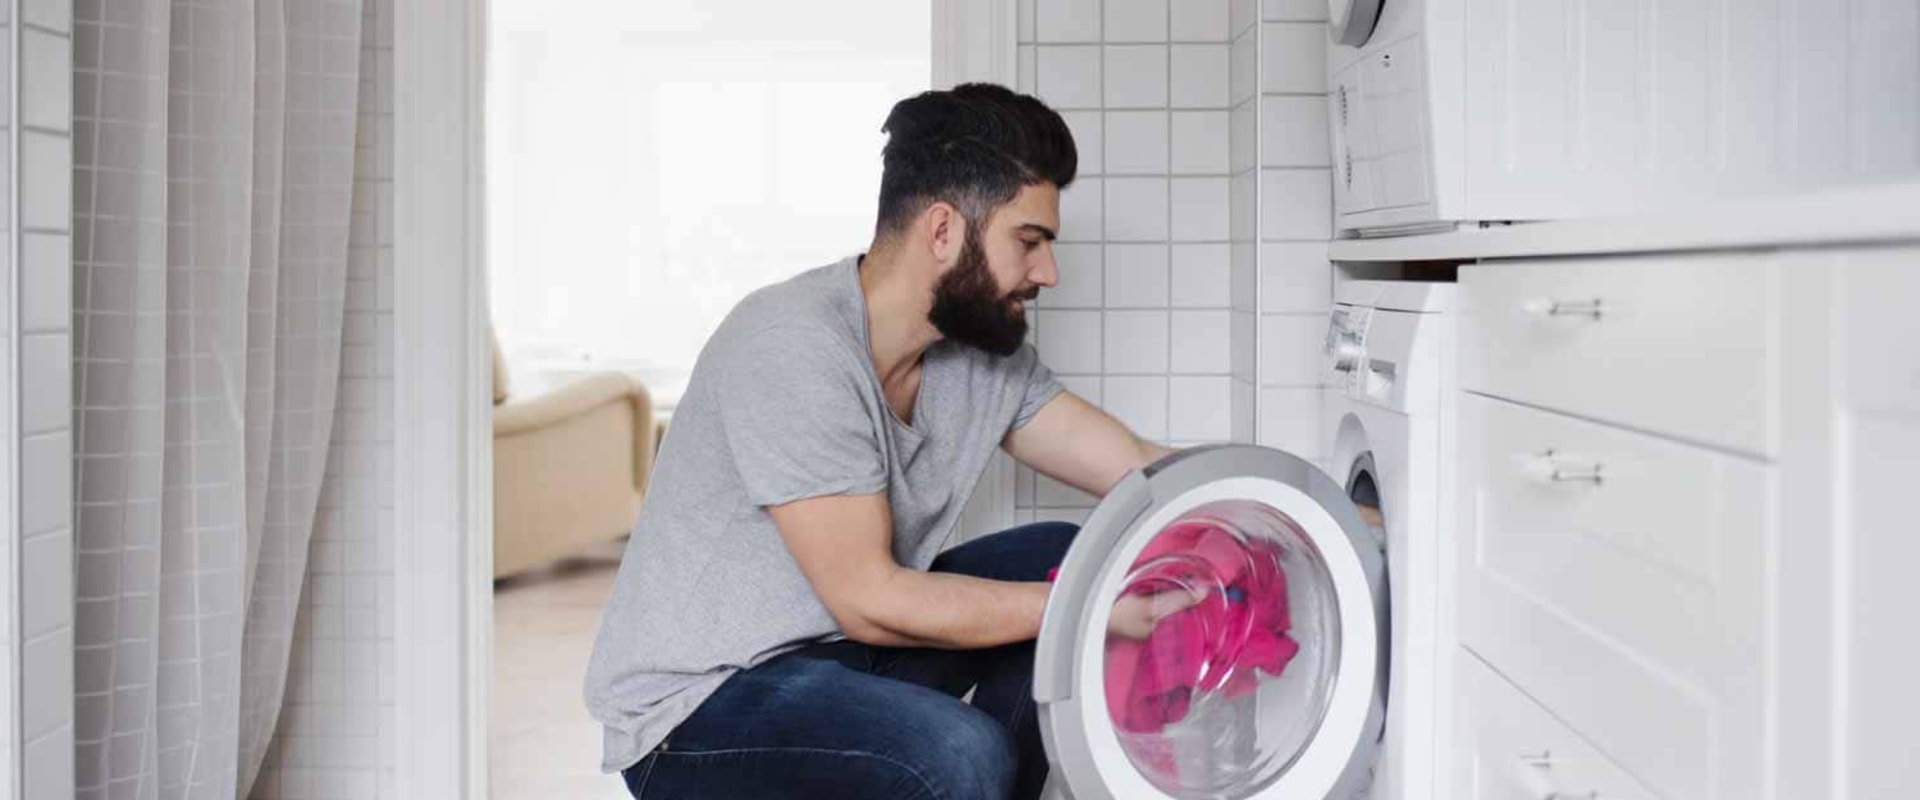 Choosing the Best Dryer Vent Cleaning Company in Pompano Beach, FL